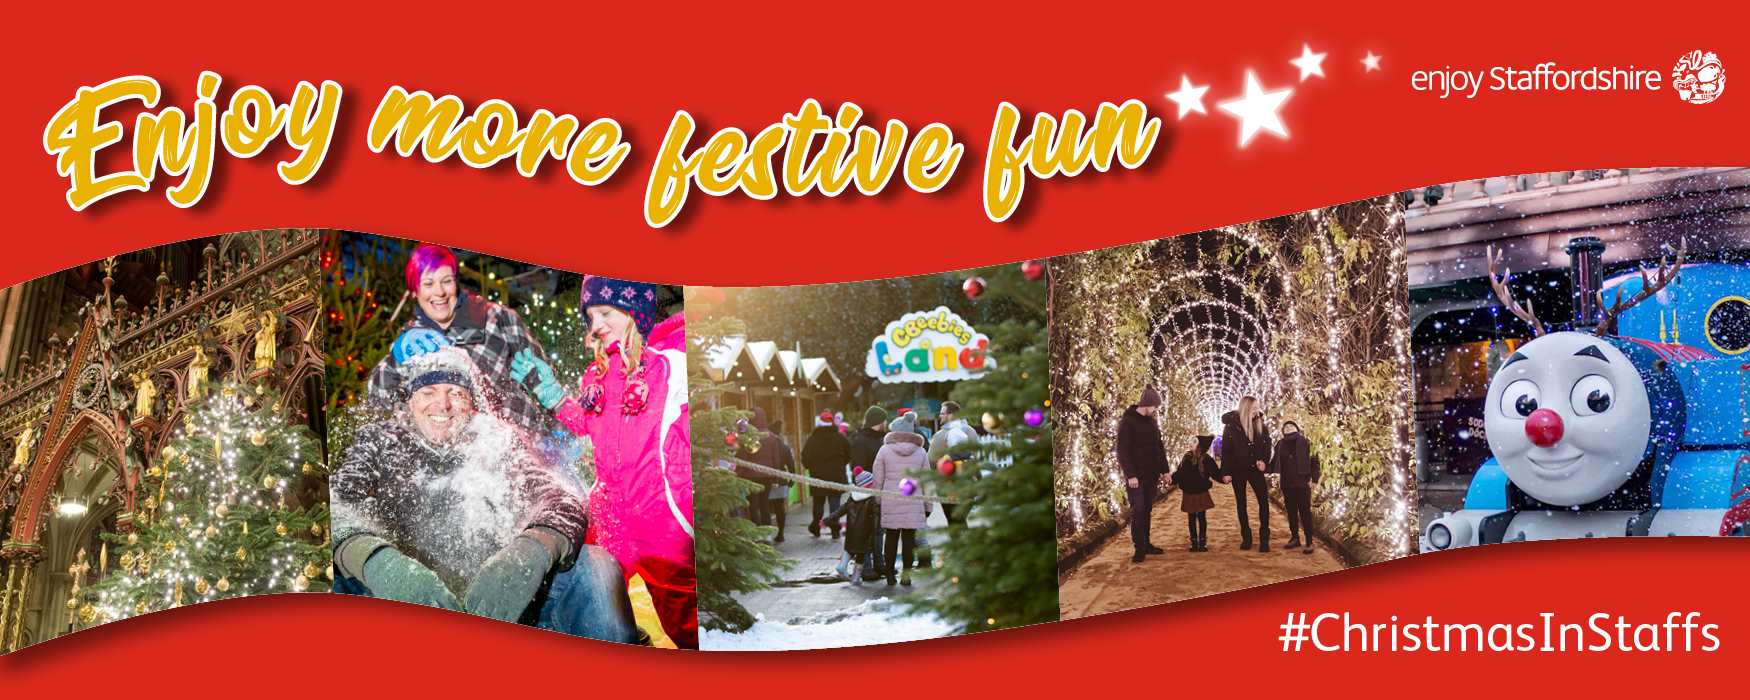 Enjoy more festive fun this Christmas in Staffordshire. Graphic promoting Christmas things to do. Click to find out more.